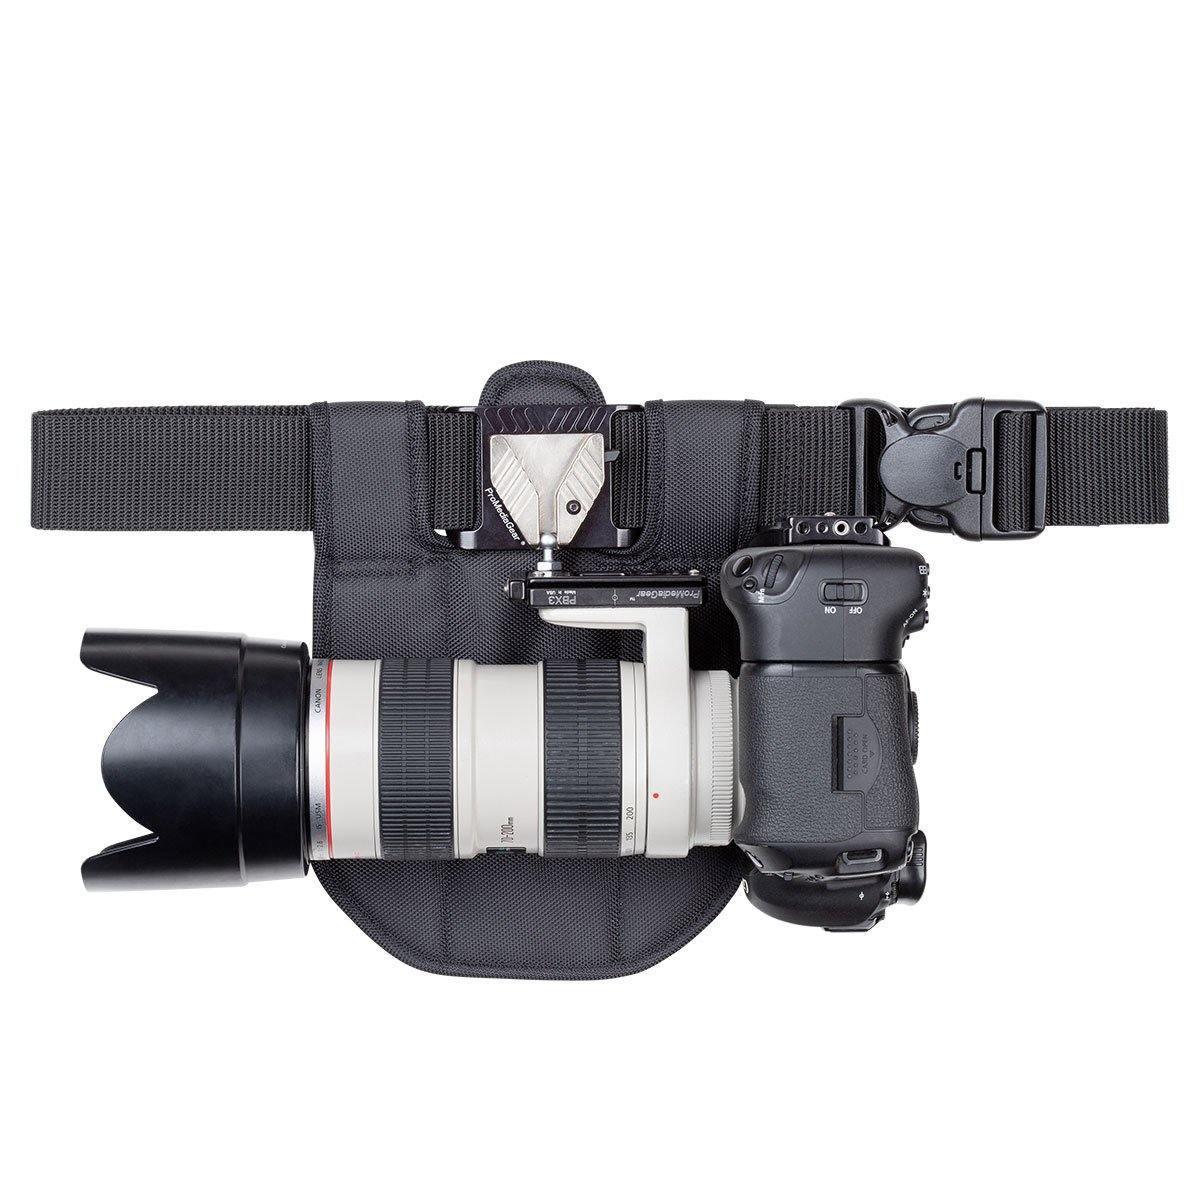 Easily carry DSLR with 70-200mm lens